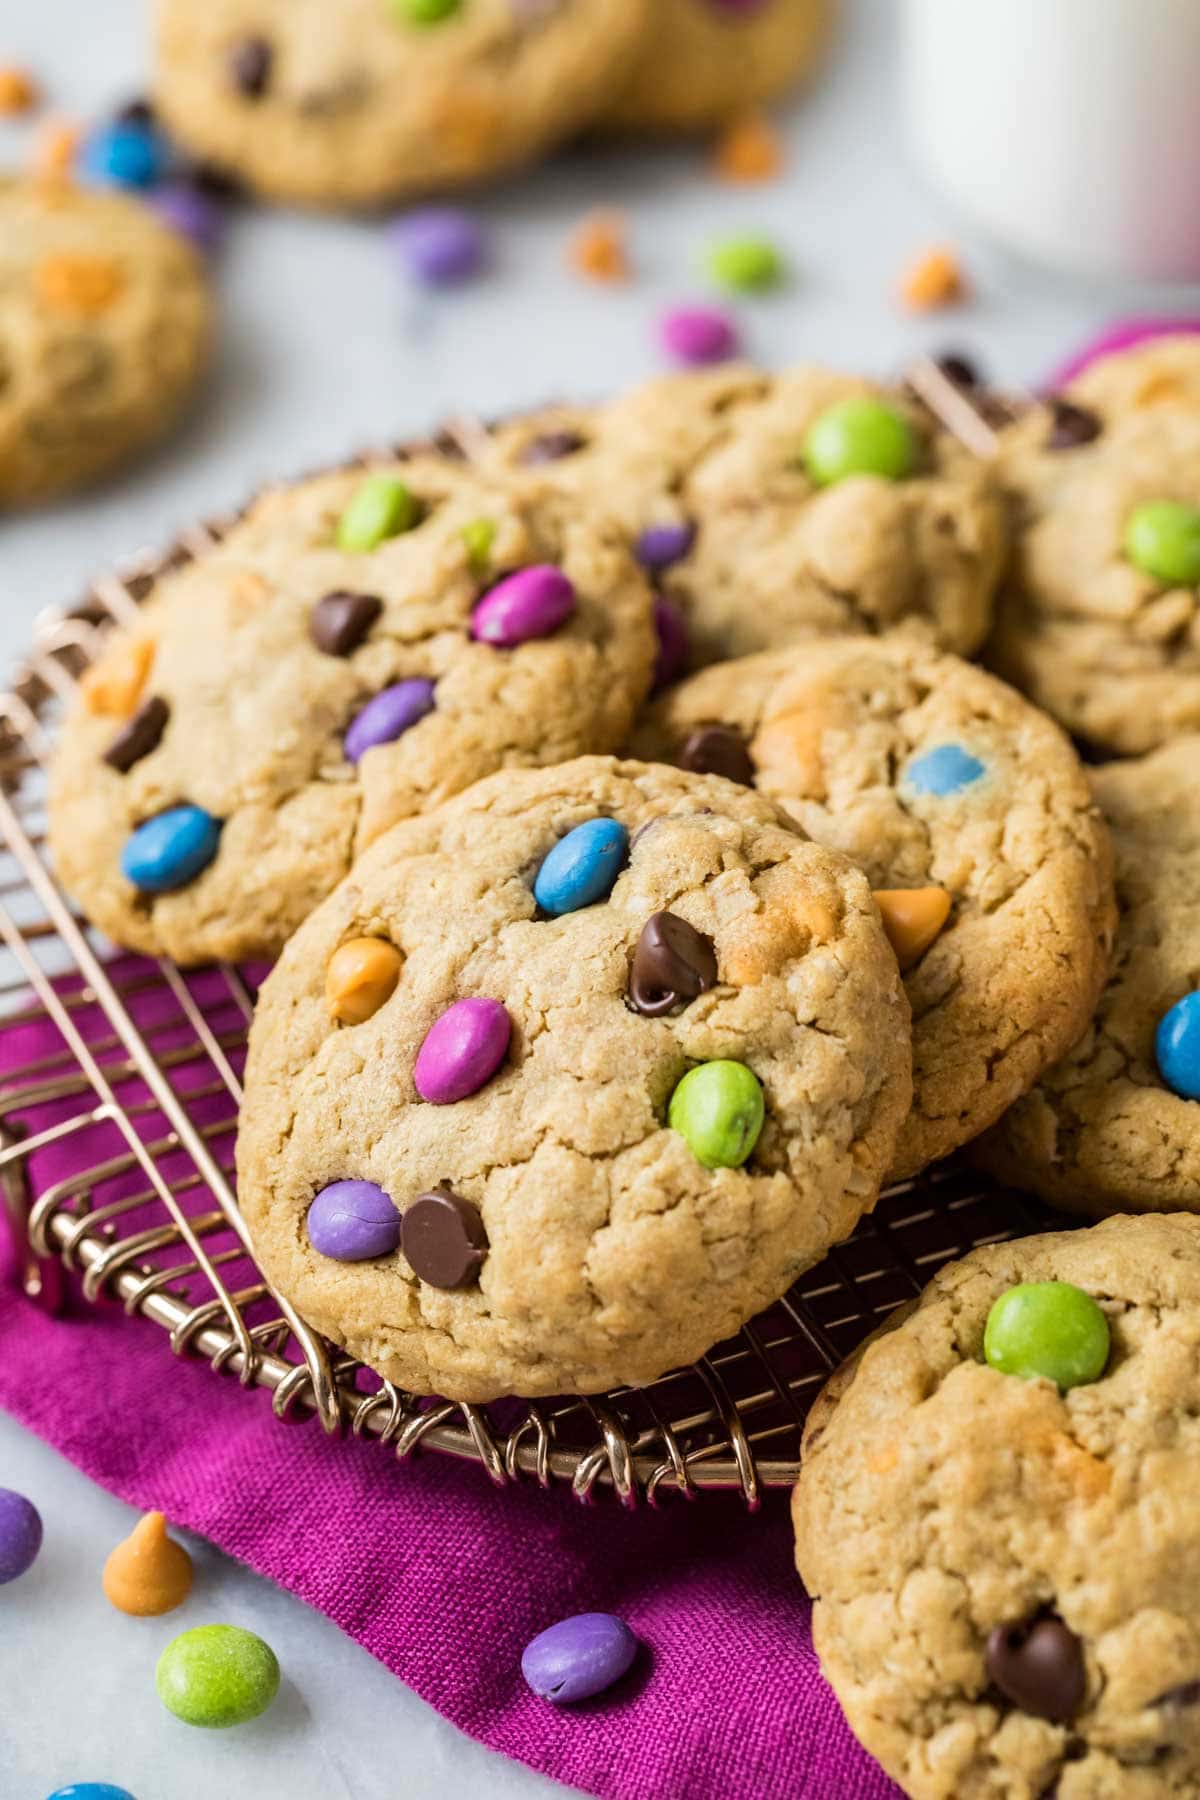 Cookies made with oats, colorful candy coated chocolate, and peanut butter on a cooling rack.